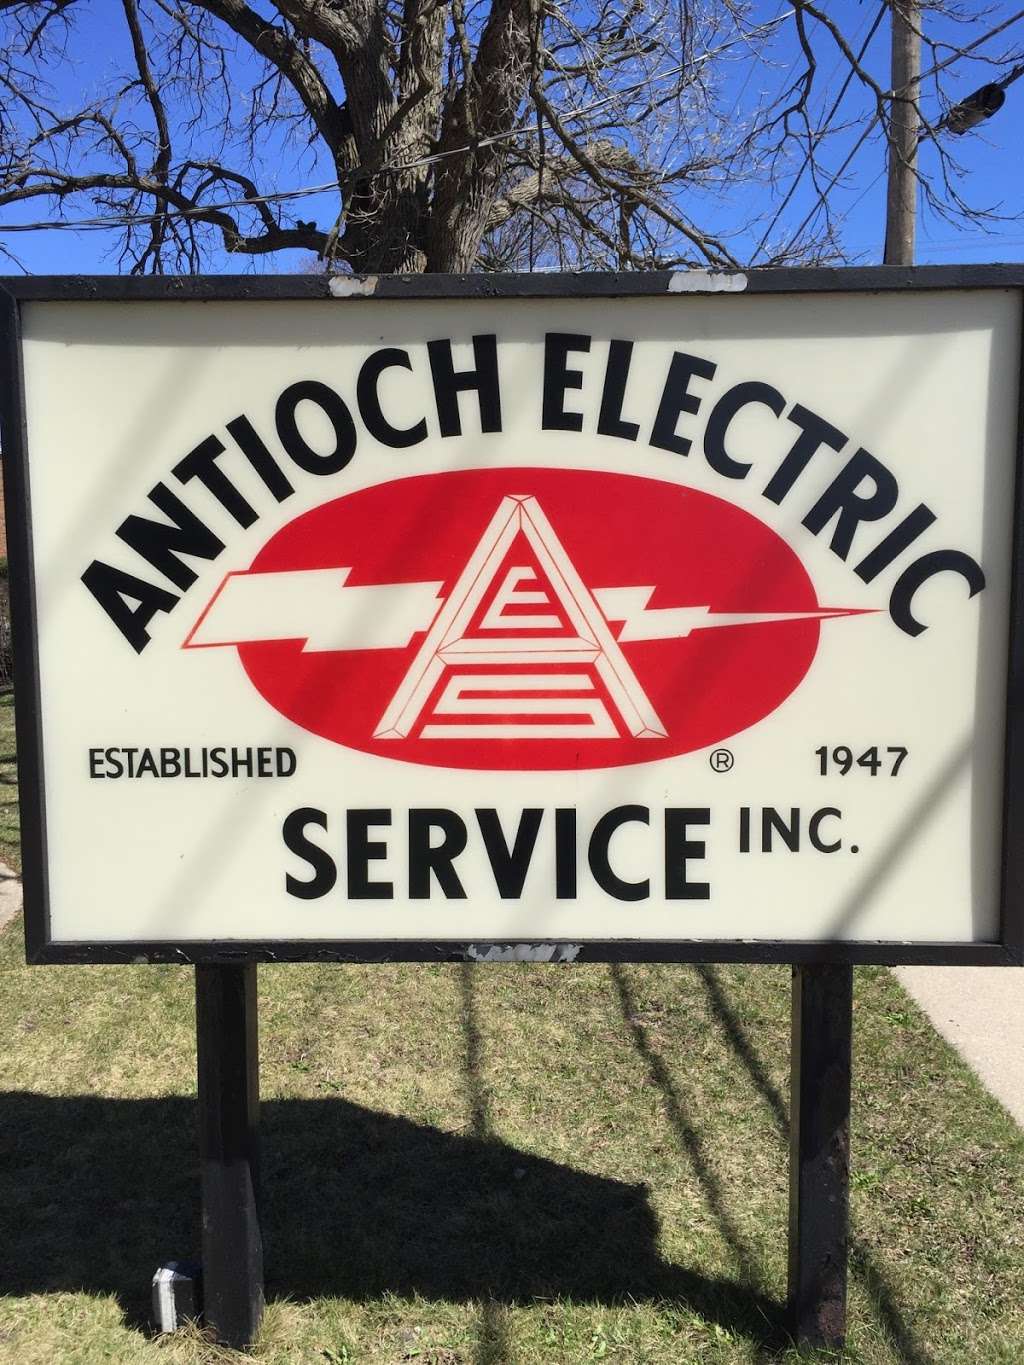 Antioch Electric Service Inc | 543 Lake St, Antioch, IL 60002 | Phone: (847) 395-0642